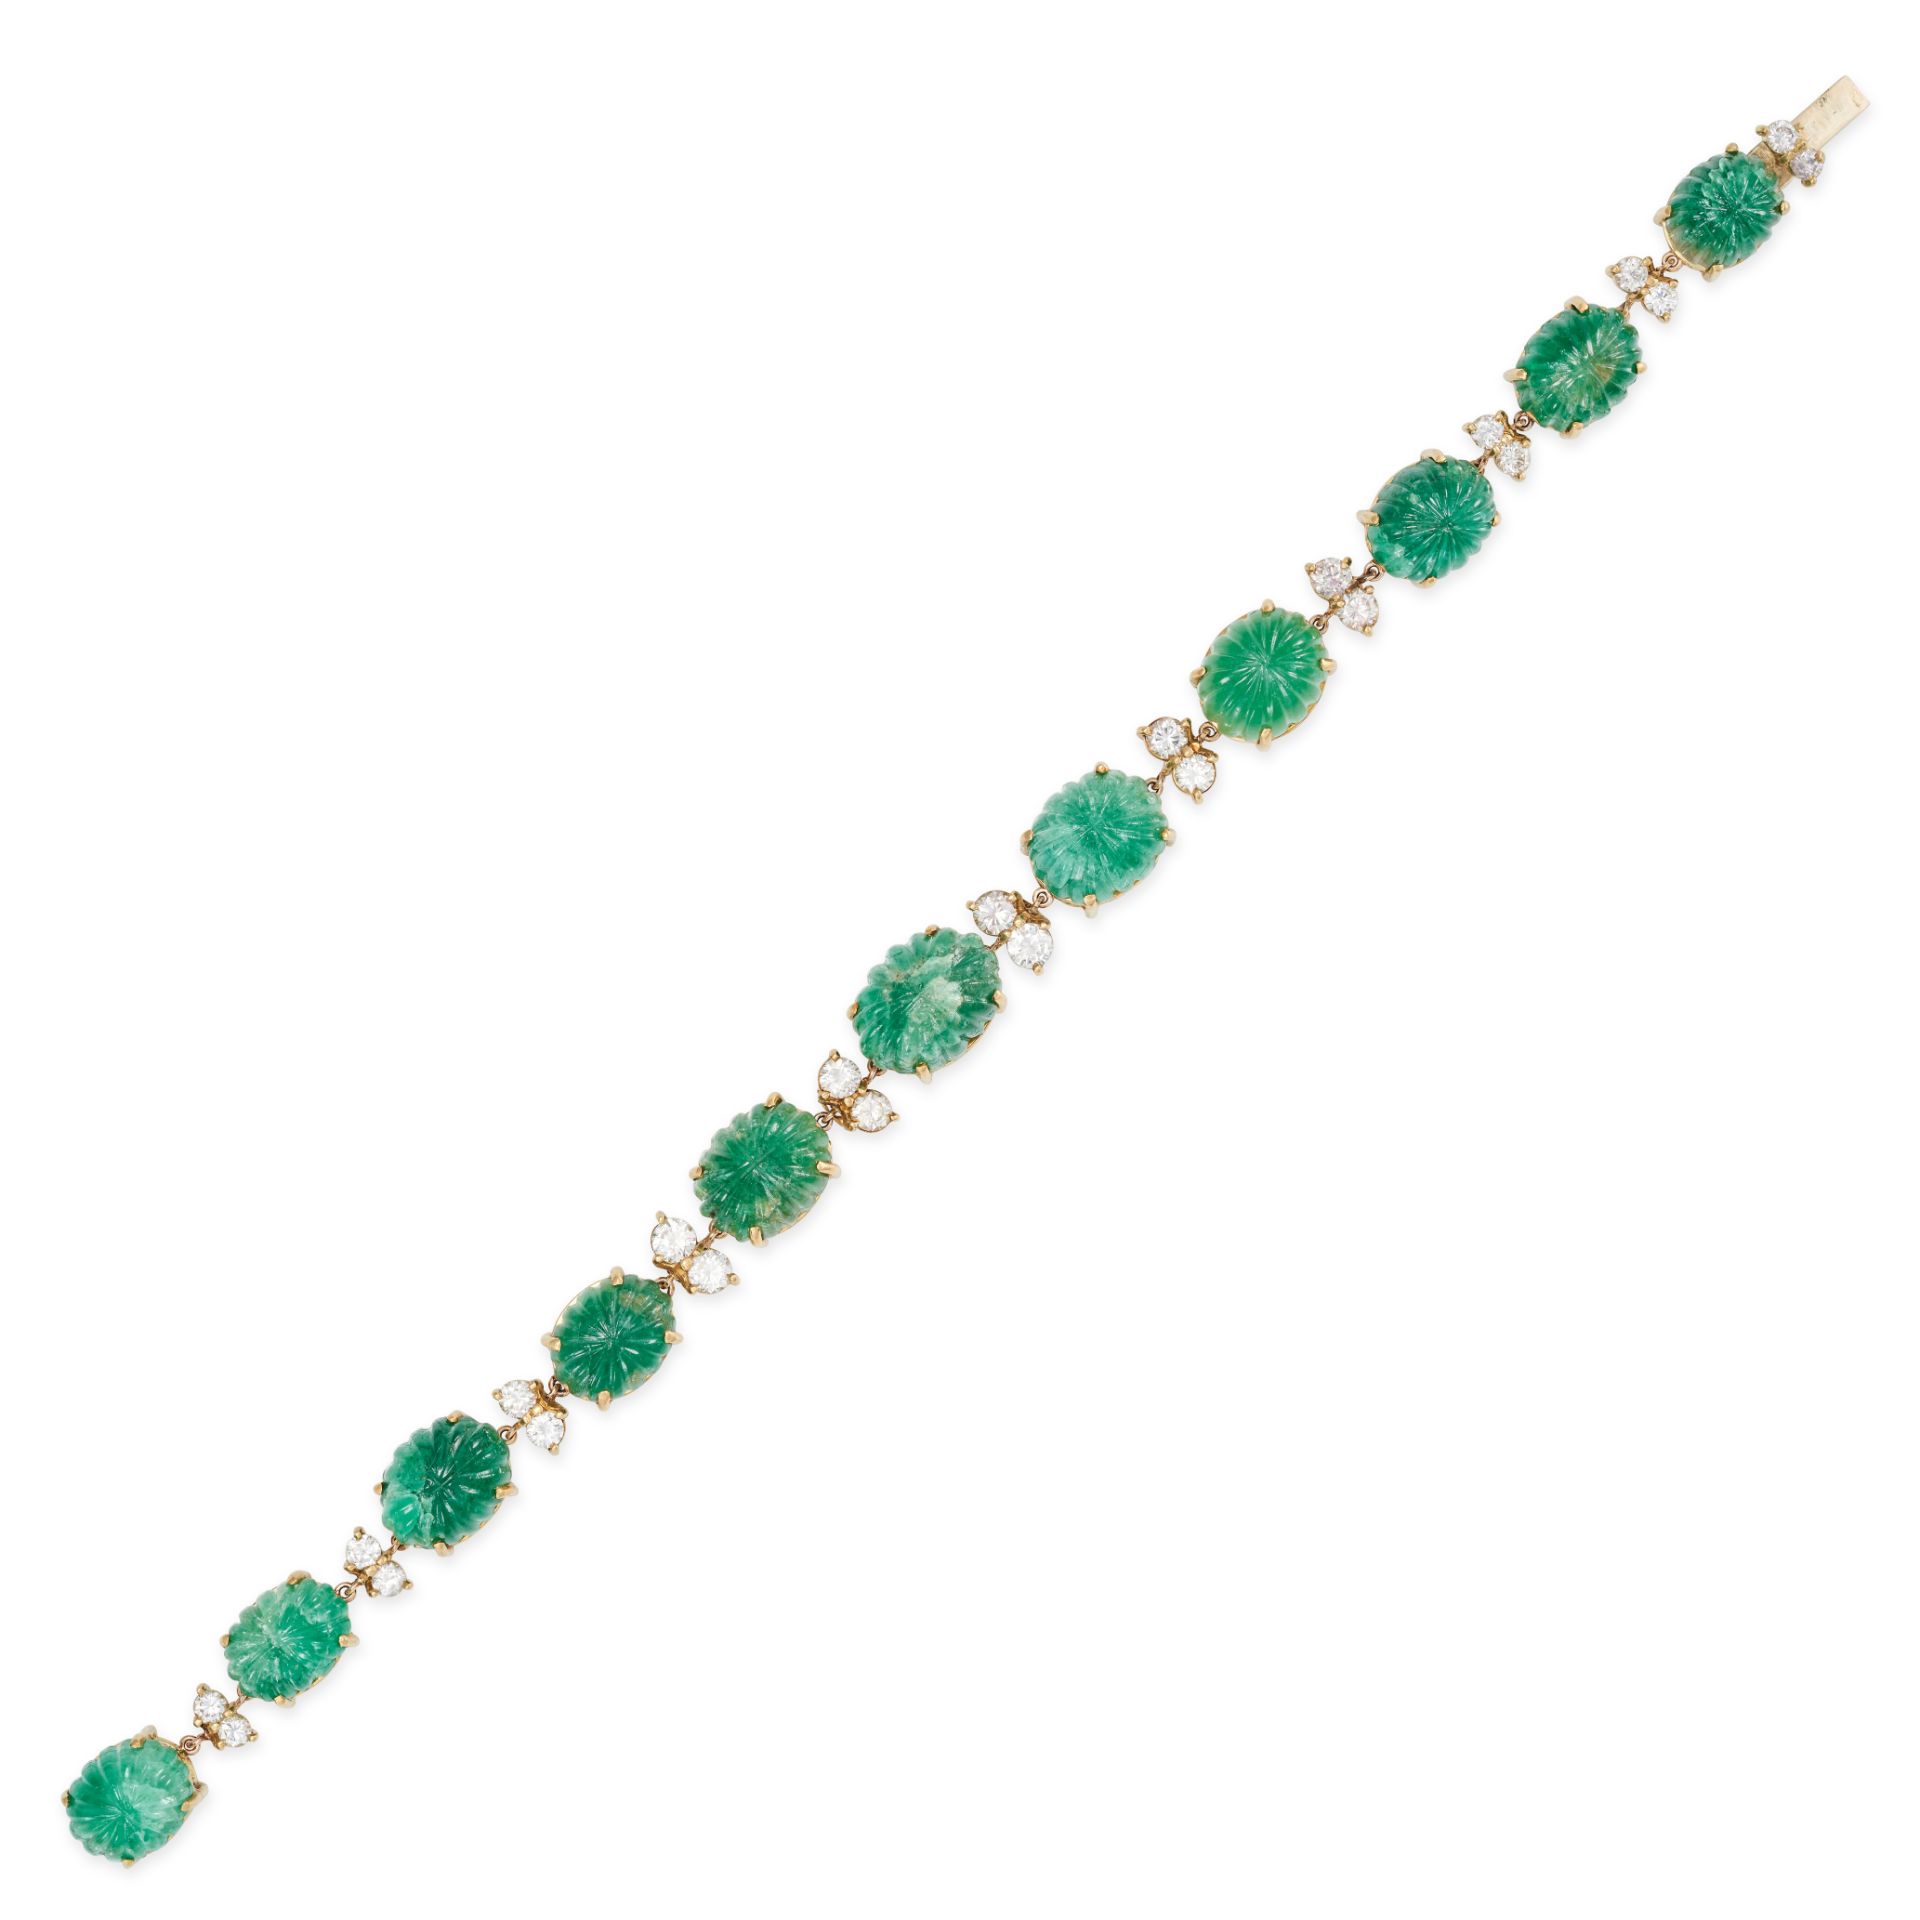 AN EMERALD AND DIAMOND BRACELET comprising a row of oval cabochon carved emeralds accented by pai...